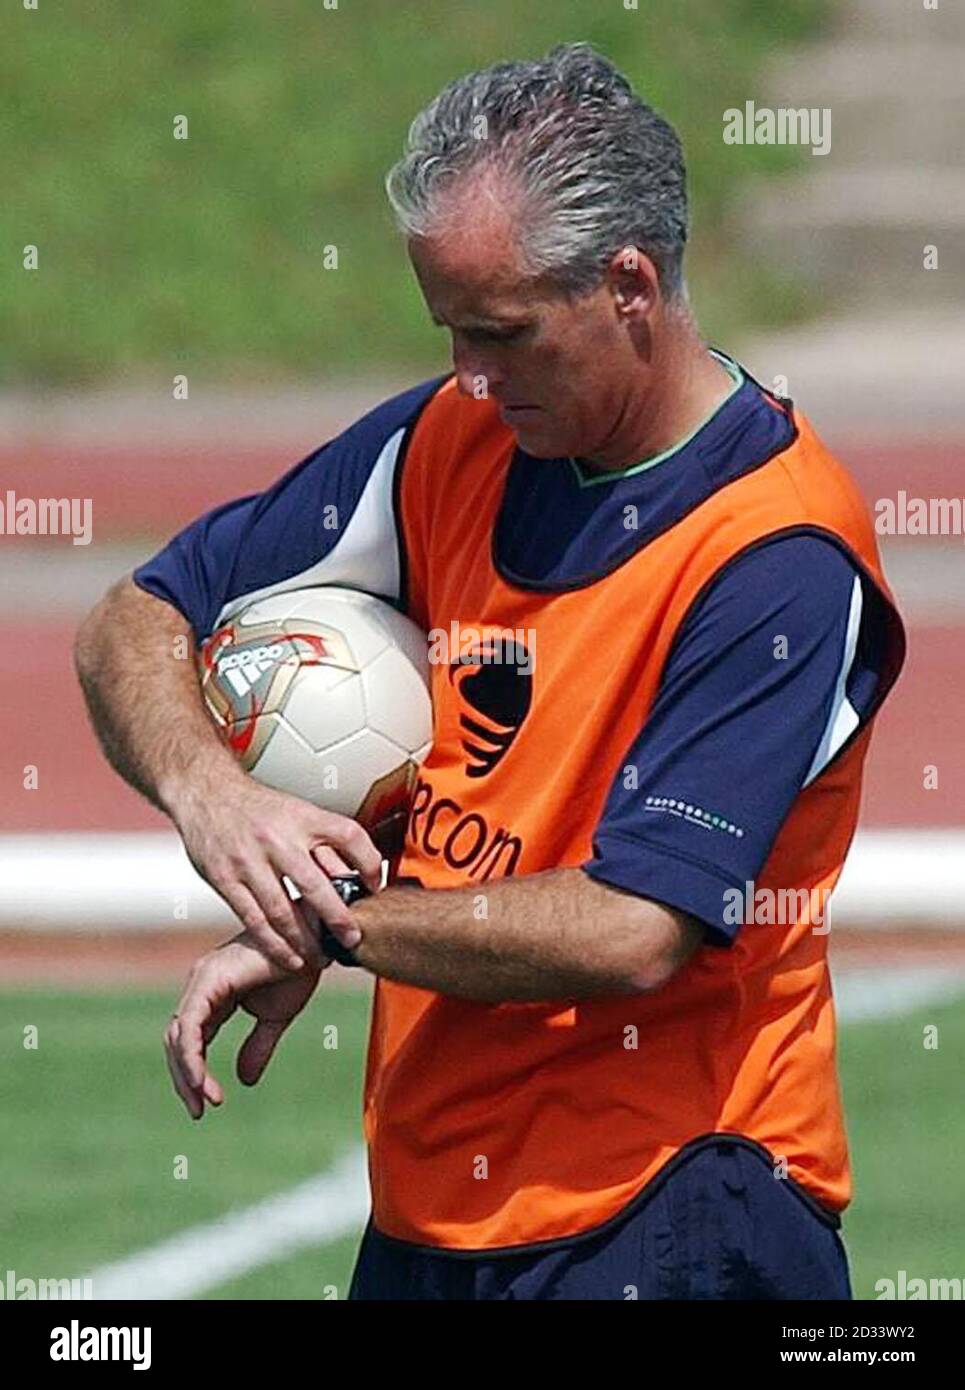 Republic of Ireland manager Mick McCarthy checks his watch during training at Sanggok-Dong Military Sports Facility, near Seoul, South Korea. Republic of Ireland play Spain in the World Cup, Second round match. Stock Photo